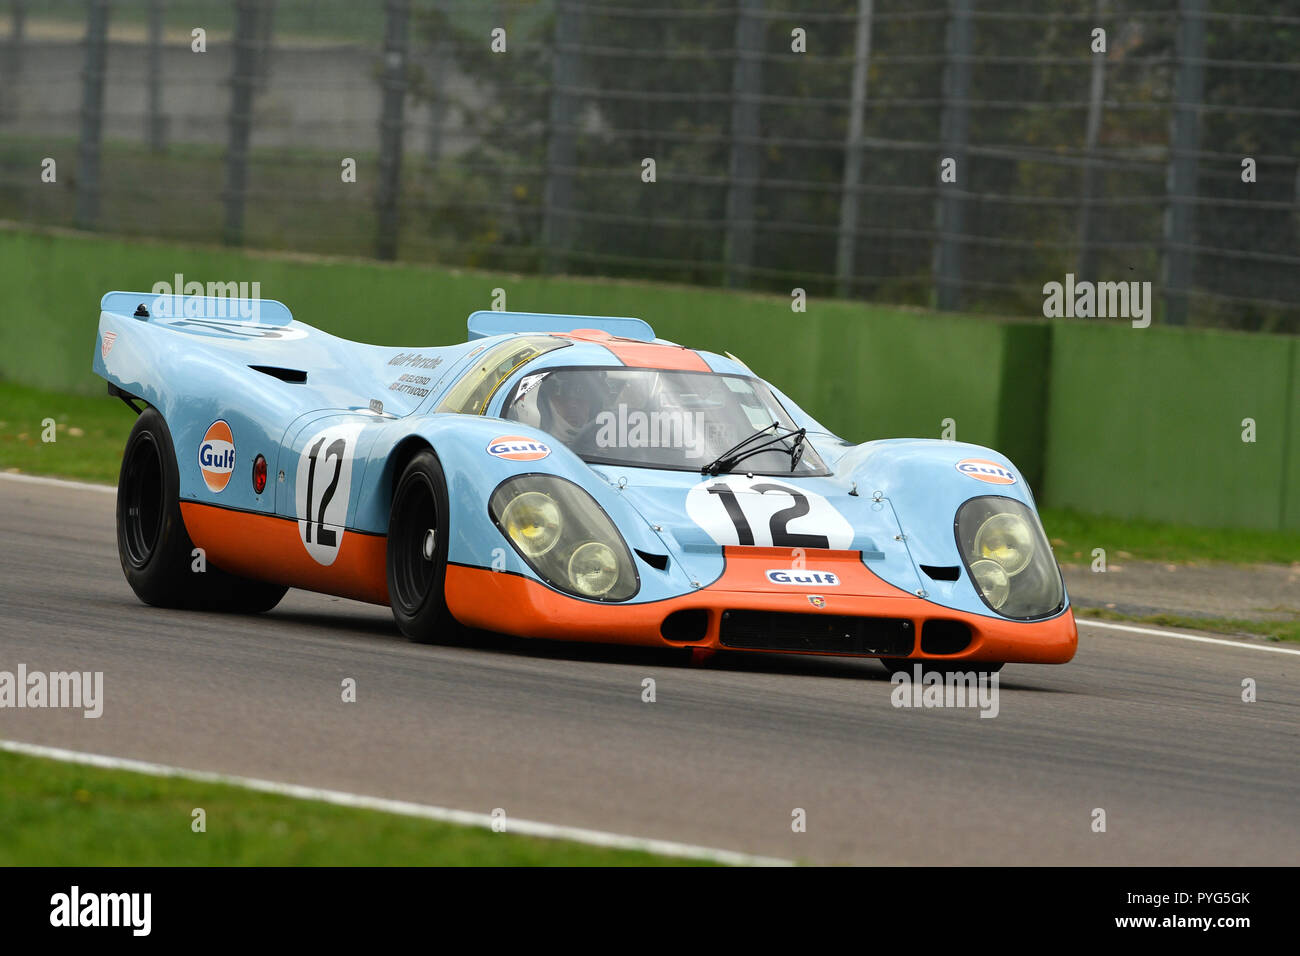 Imola, Italy. 26th October 2018. Imola Classic 26 October 2018: Porsche 917 1970 Gulf Livery ex Attwood/Elford driven by Claudio Roddaro during practice session on Imola Circuit, Italy. Credit: dan74/Alamy Live News Stock Photo